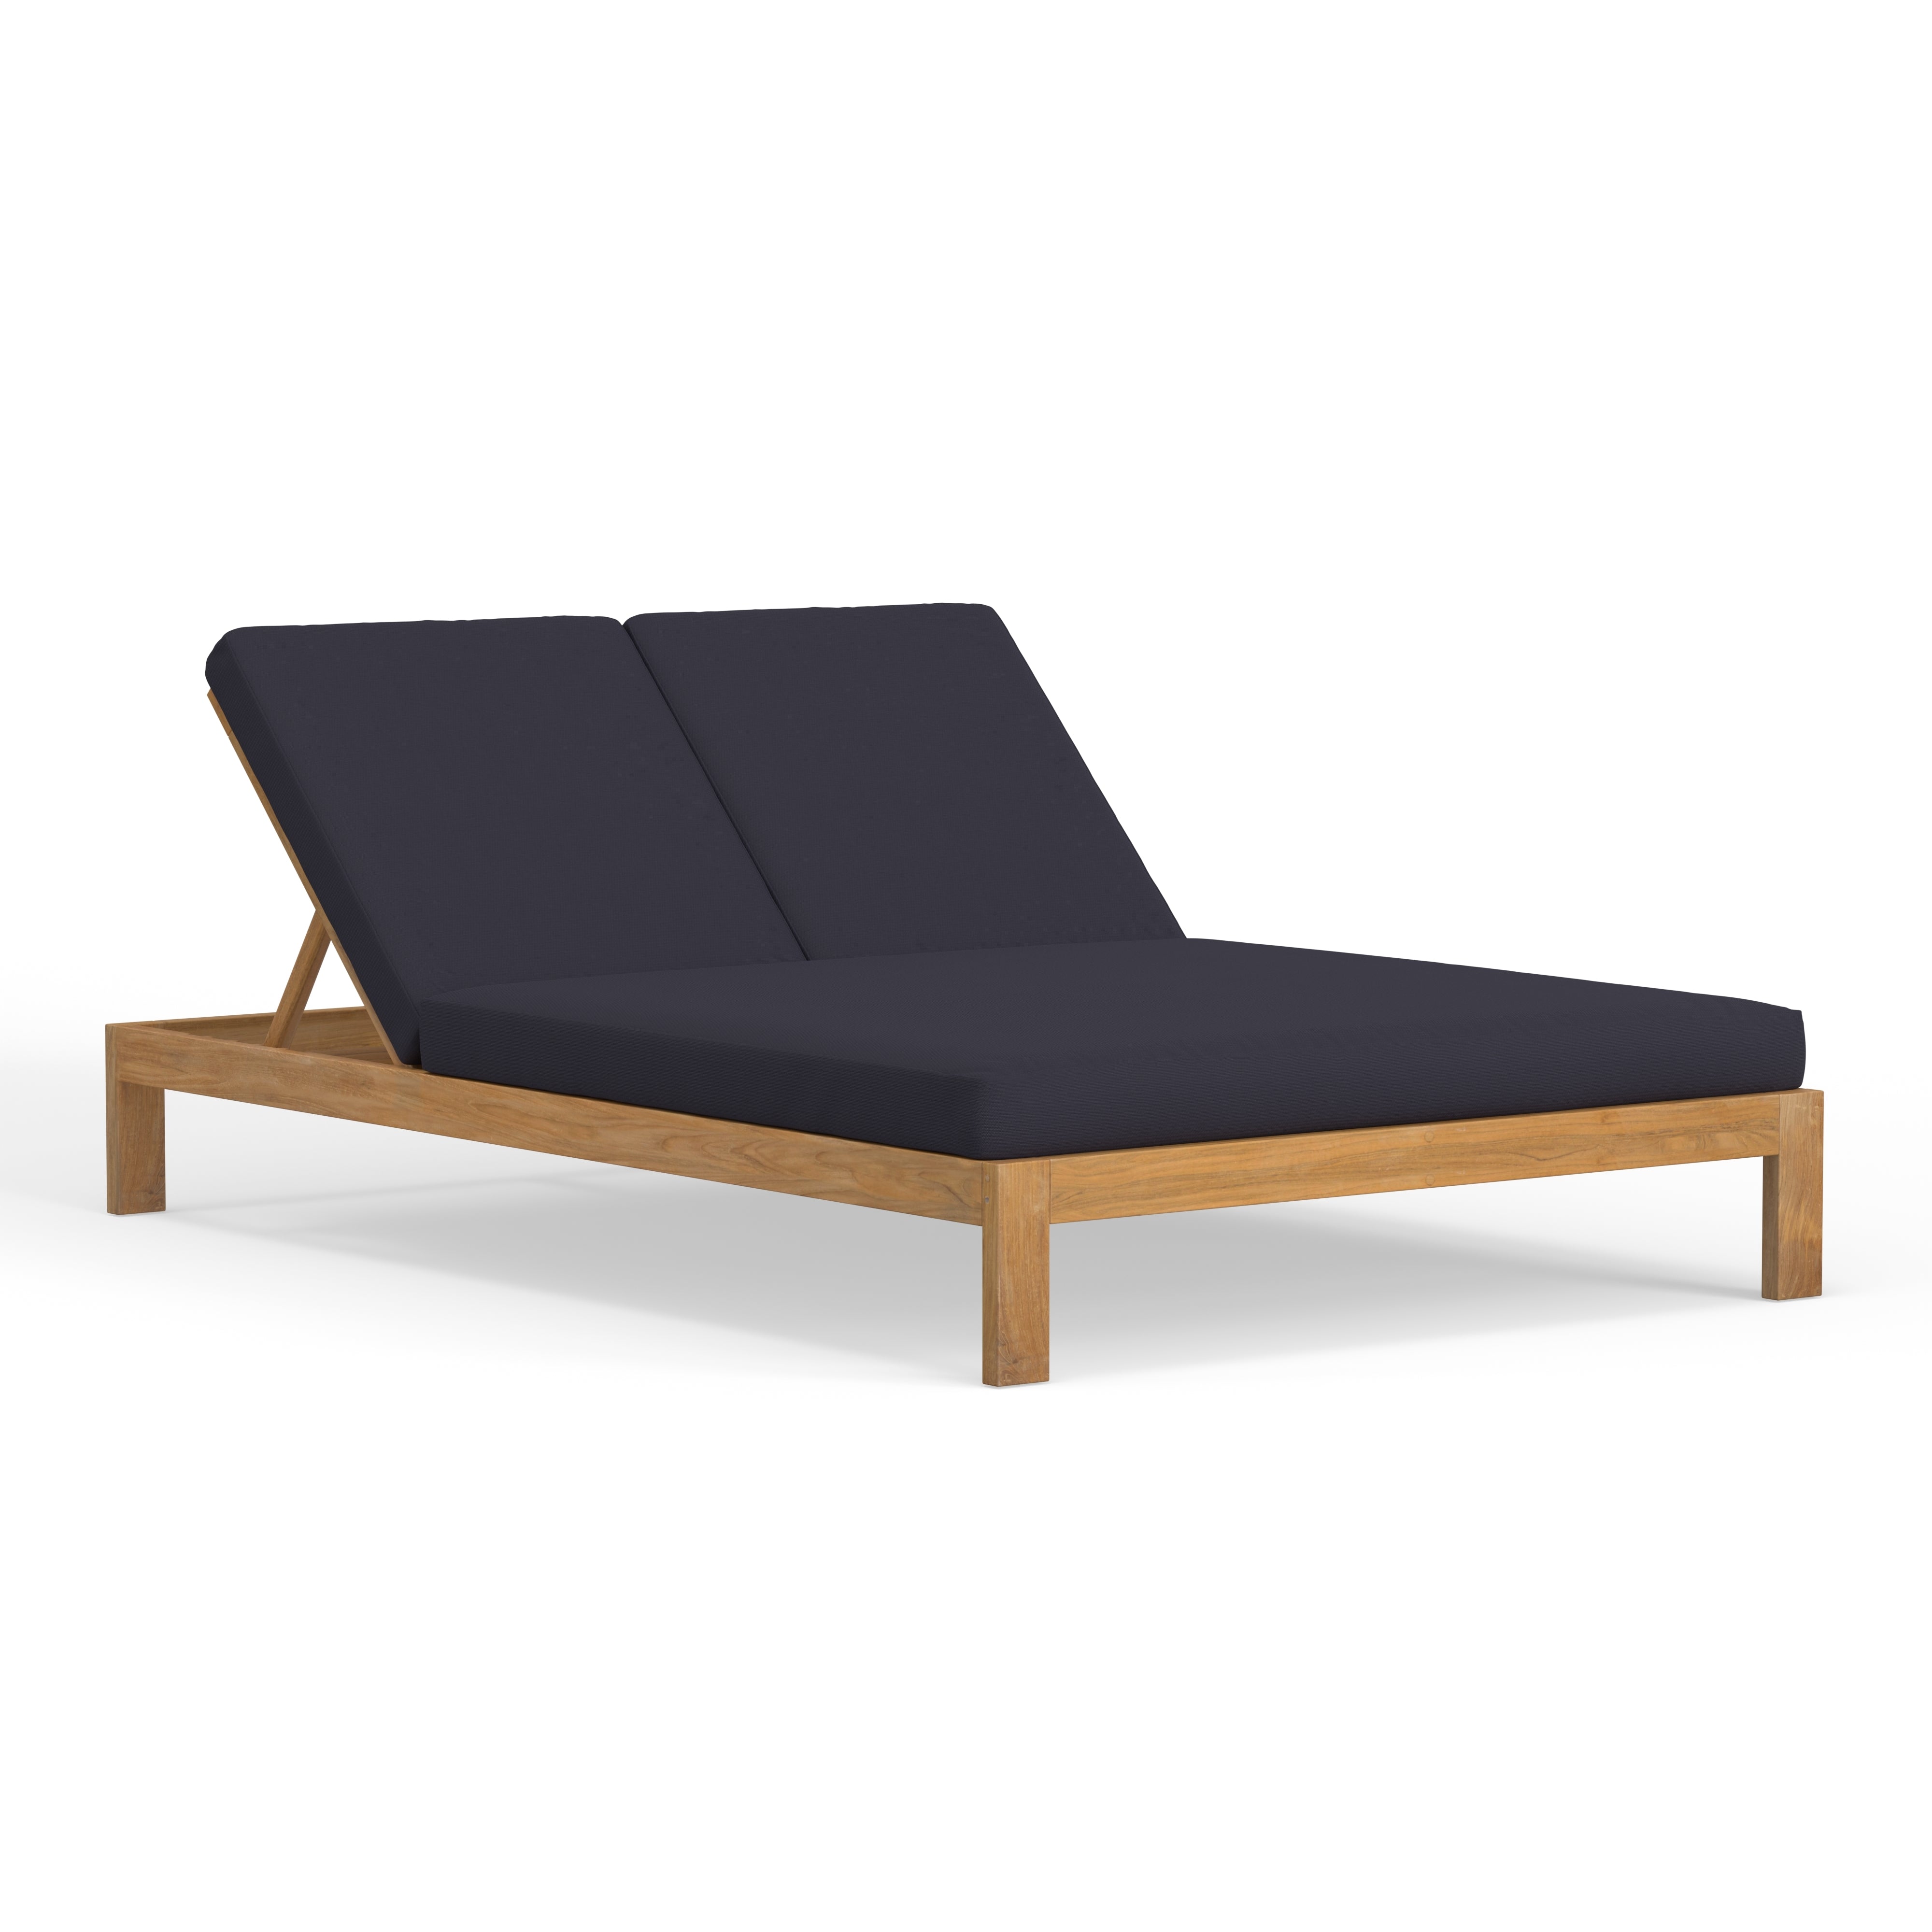 Harbor Classic Luxury Outdoor Poolside Double Chaise Lounge With The Most Comfortable Cushions